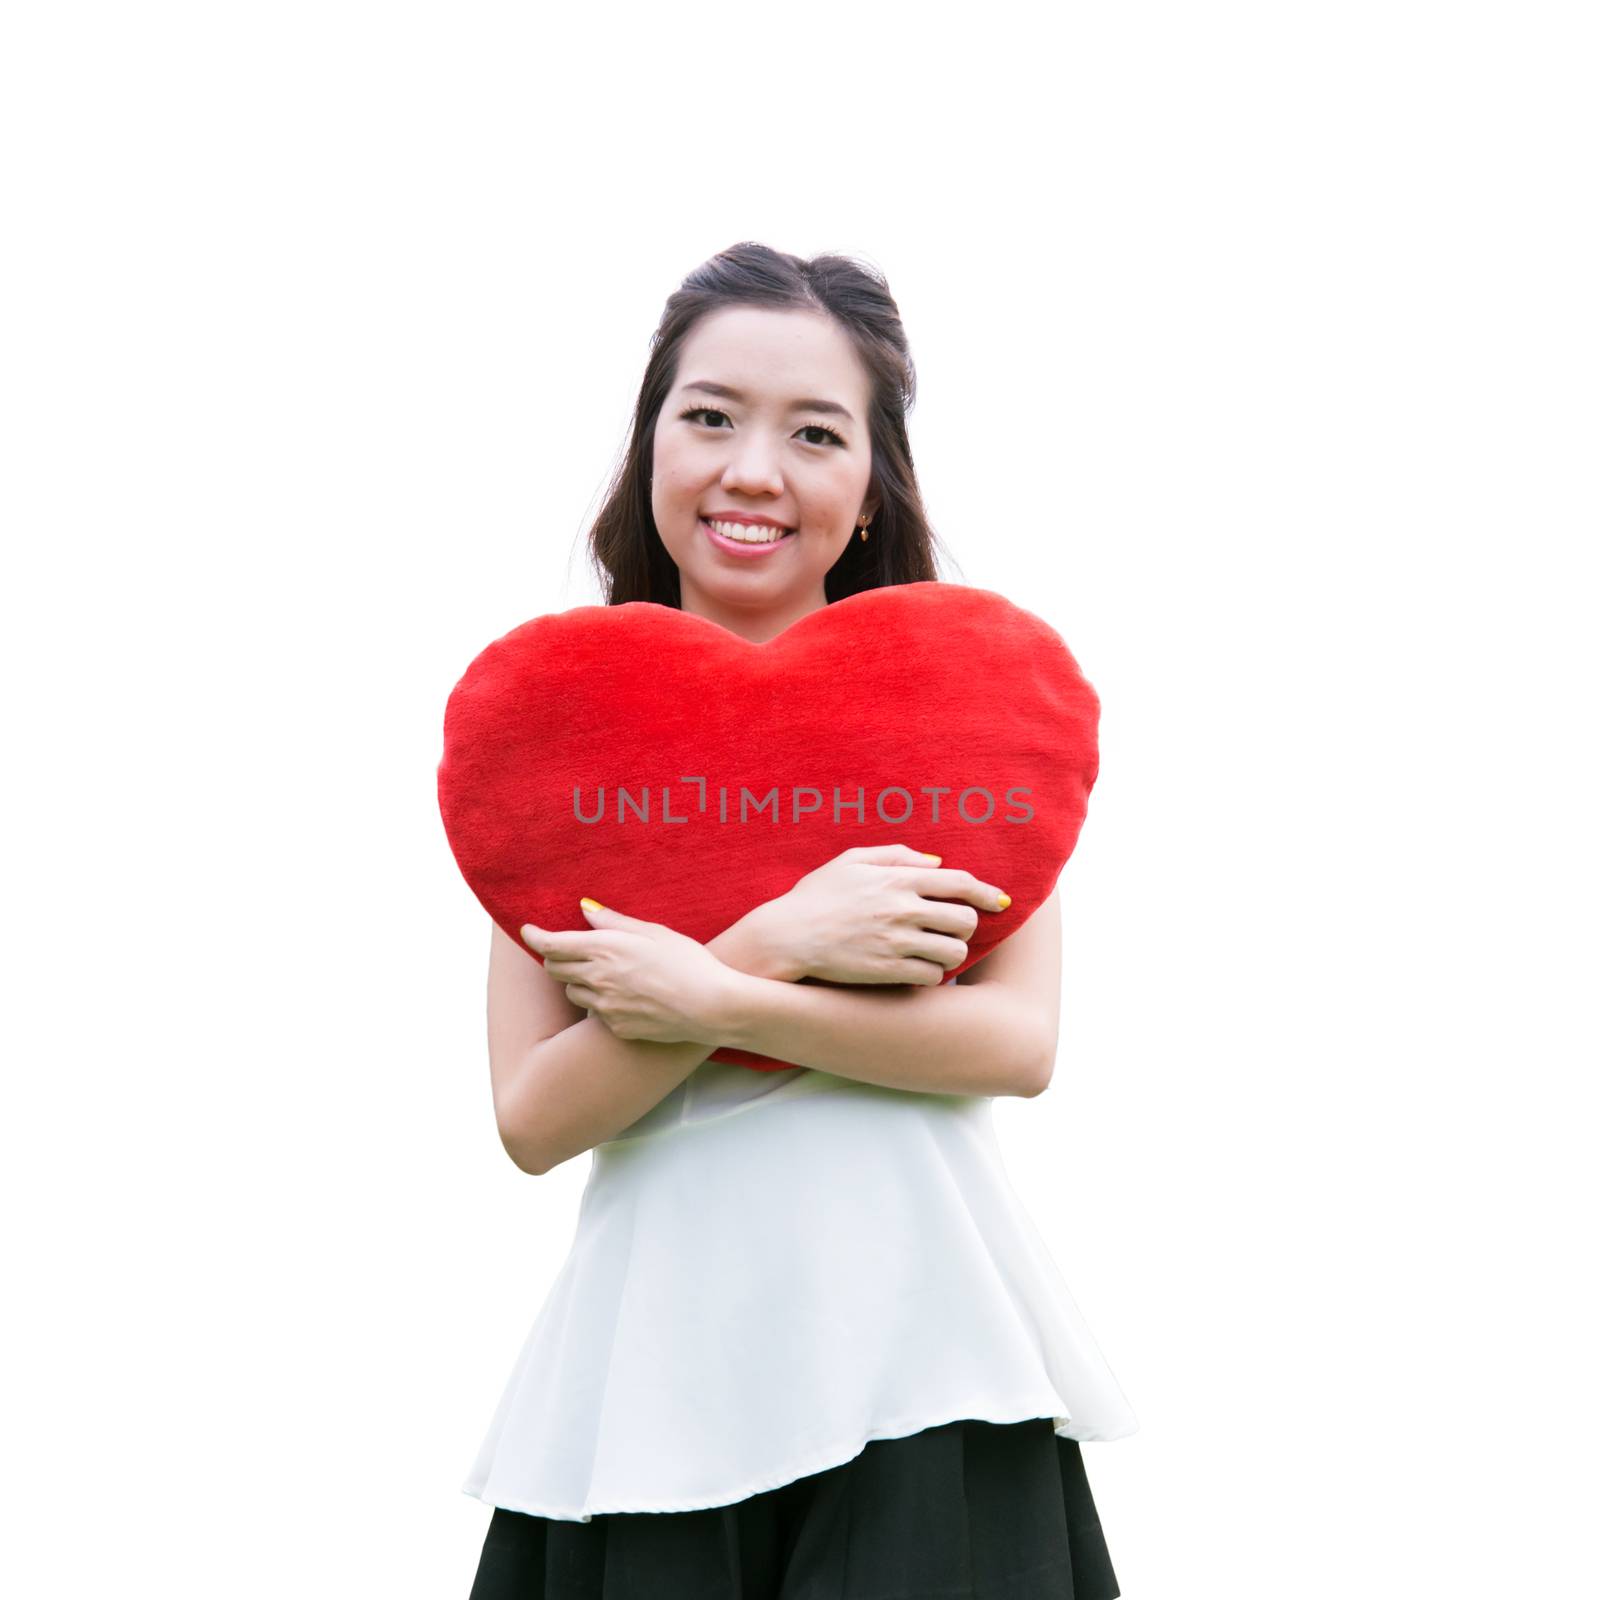 Women holding big love heart shape pillow isolated on white background,